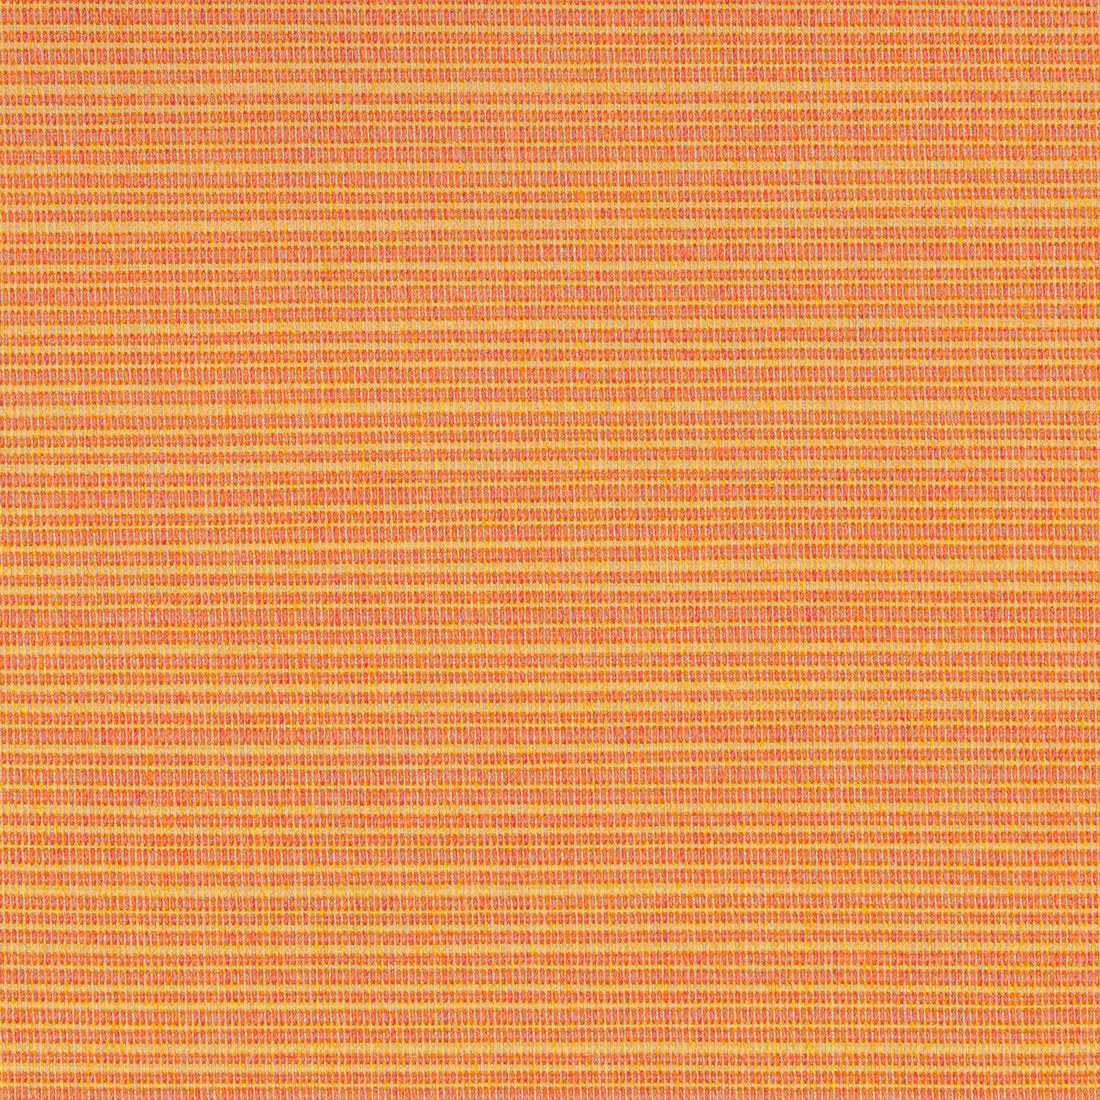 Kravet Basics fabric in 36842-2416 color - pattern 36842.2416.0 - by Kravet Basics in the Indoor / Outdoor collection